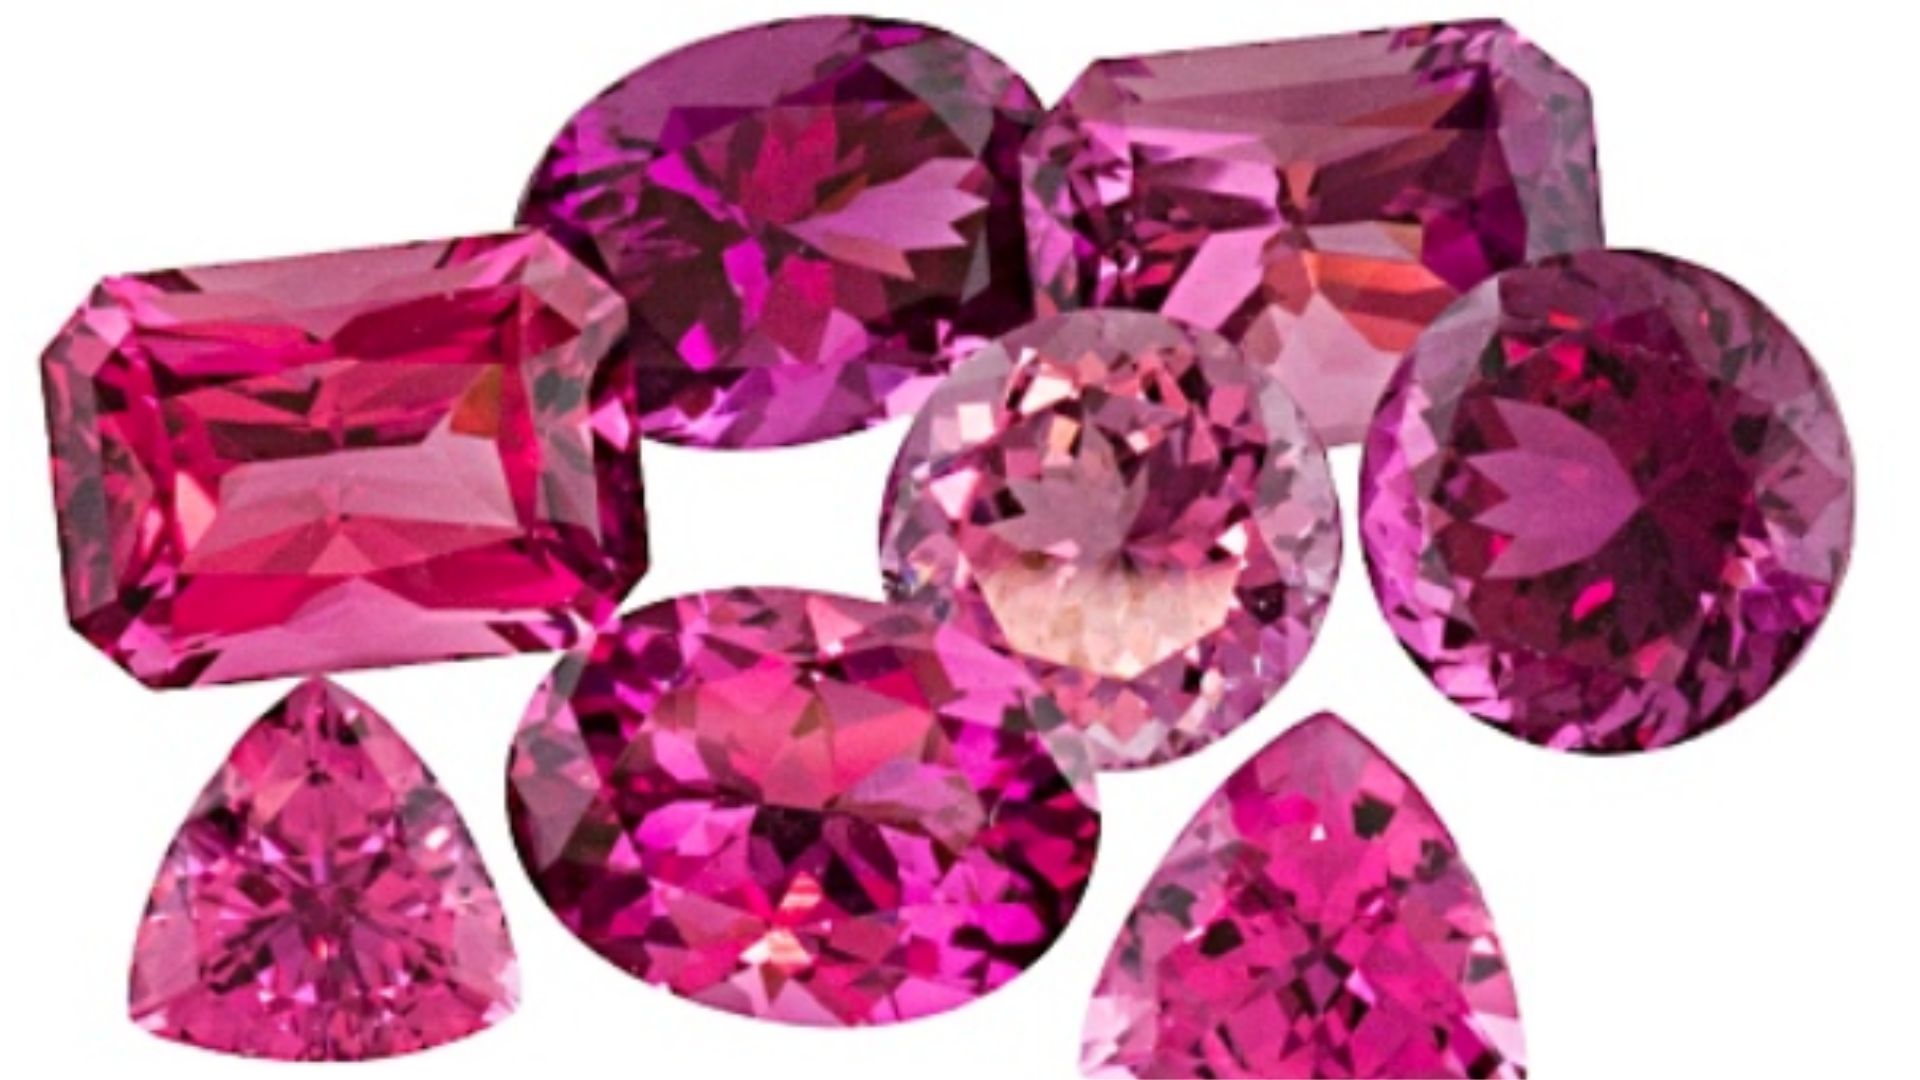 Different Sized And Shapes of Pink Gemstones